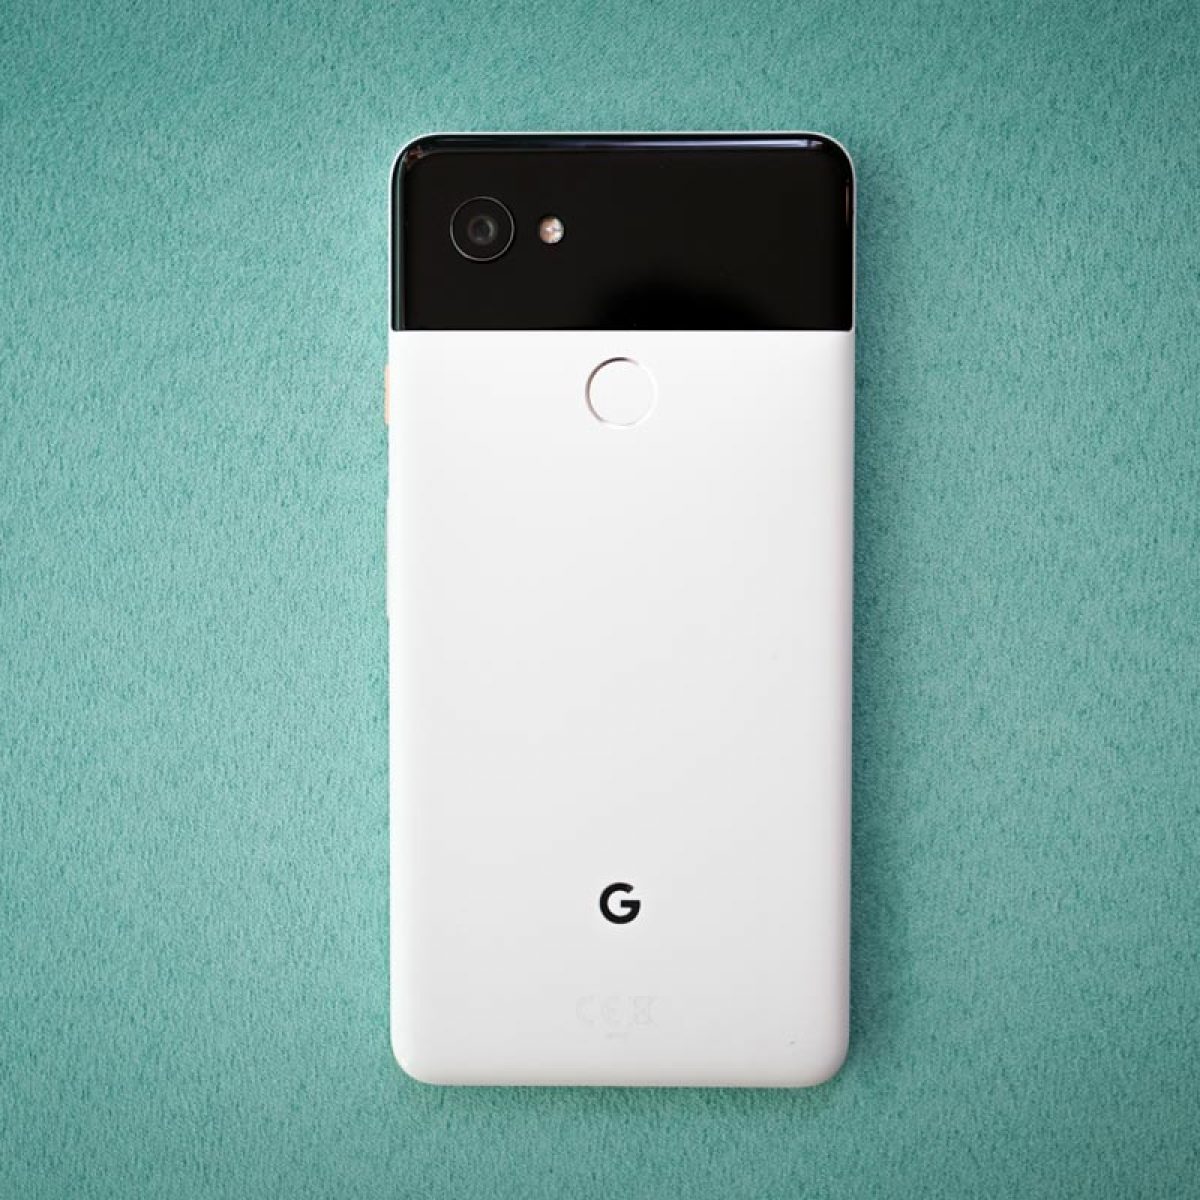 Pixel 2 and Pixel 2 XL are the latest smartphones from Google. How